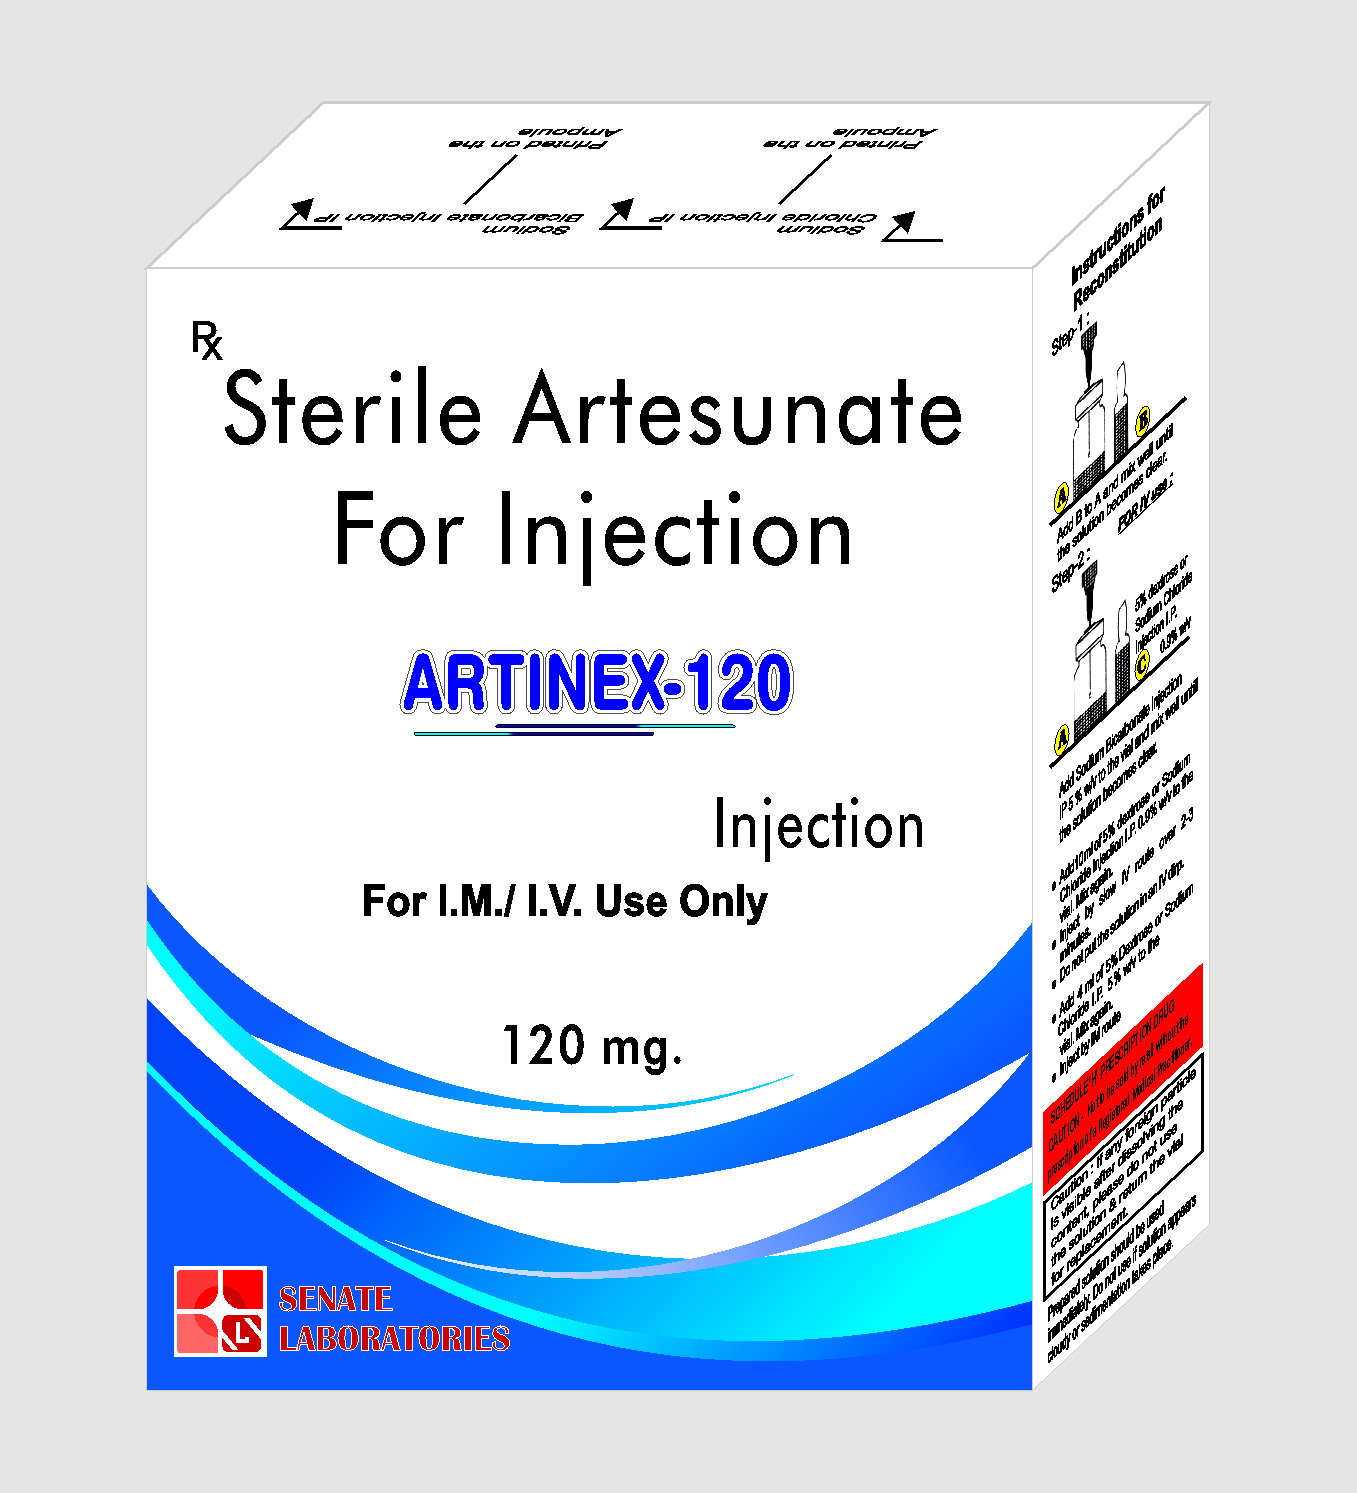 Sterile Artesunate for Injection